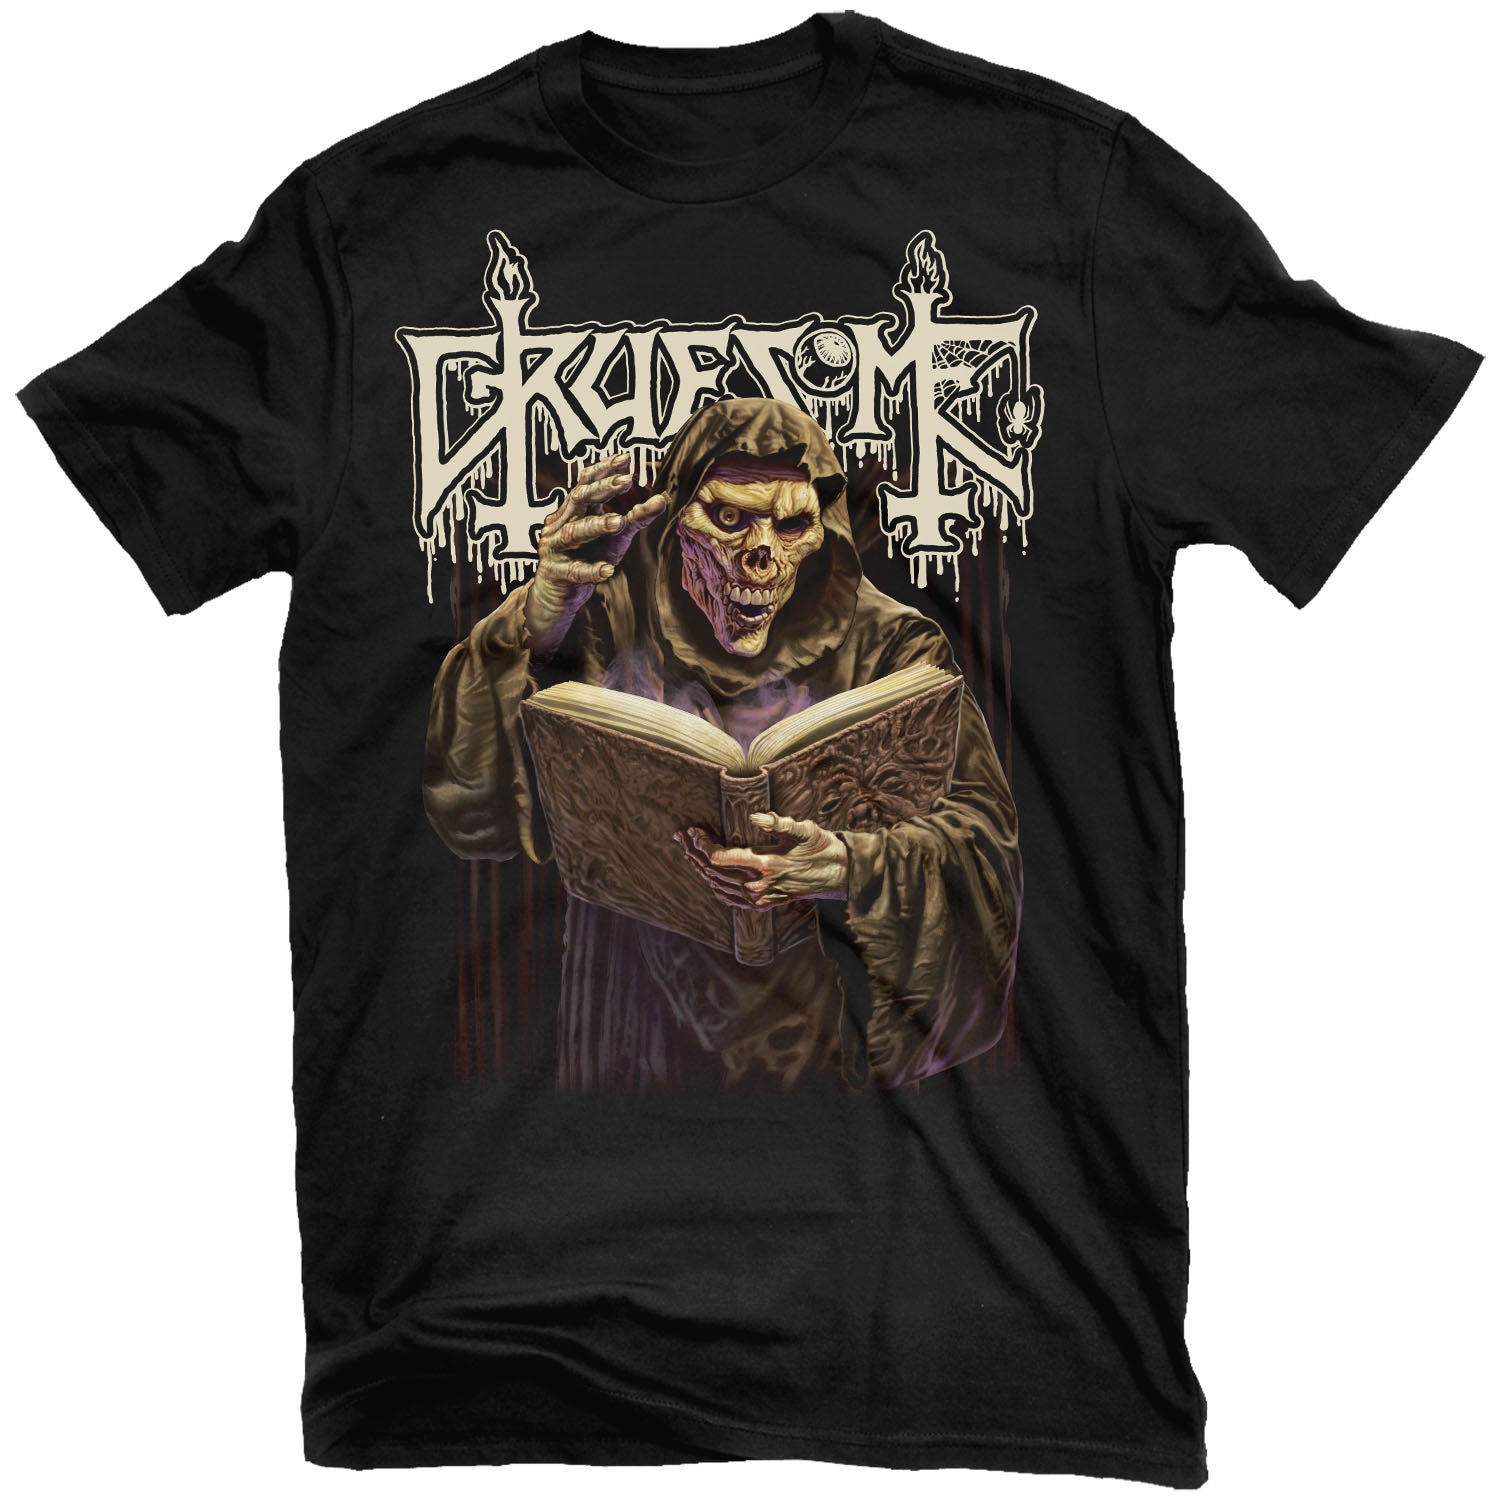 Gruesome "Hellbound" T-Shirt